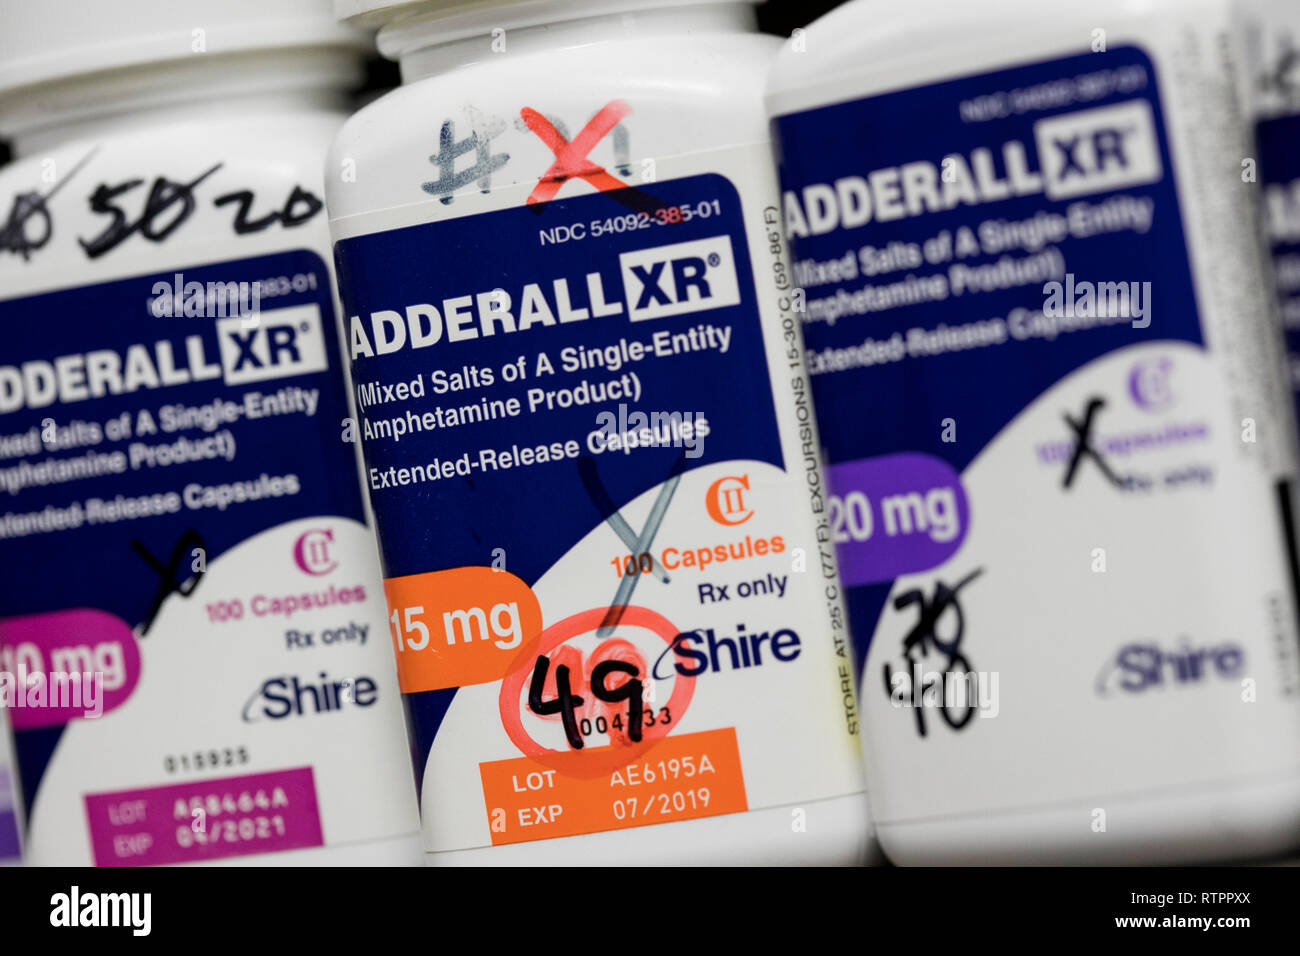 Bottles of Adderall XR prescription pharmaceuticals photographed in a pharmacy. Stock Photo